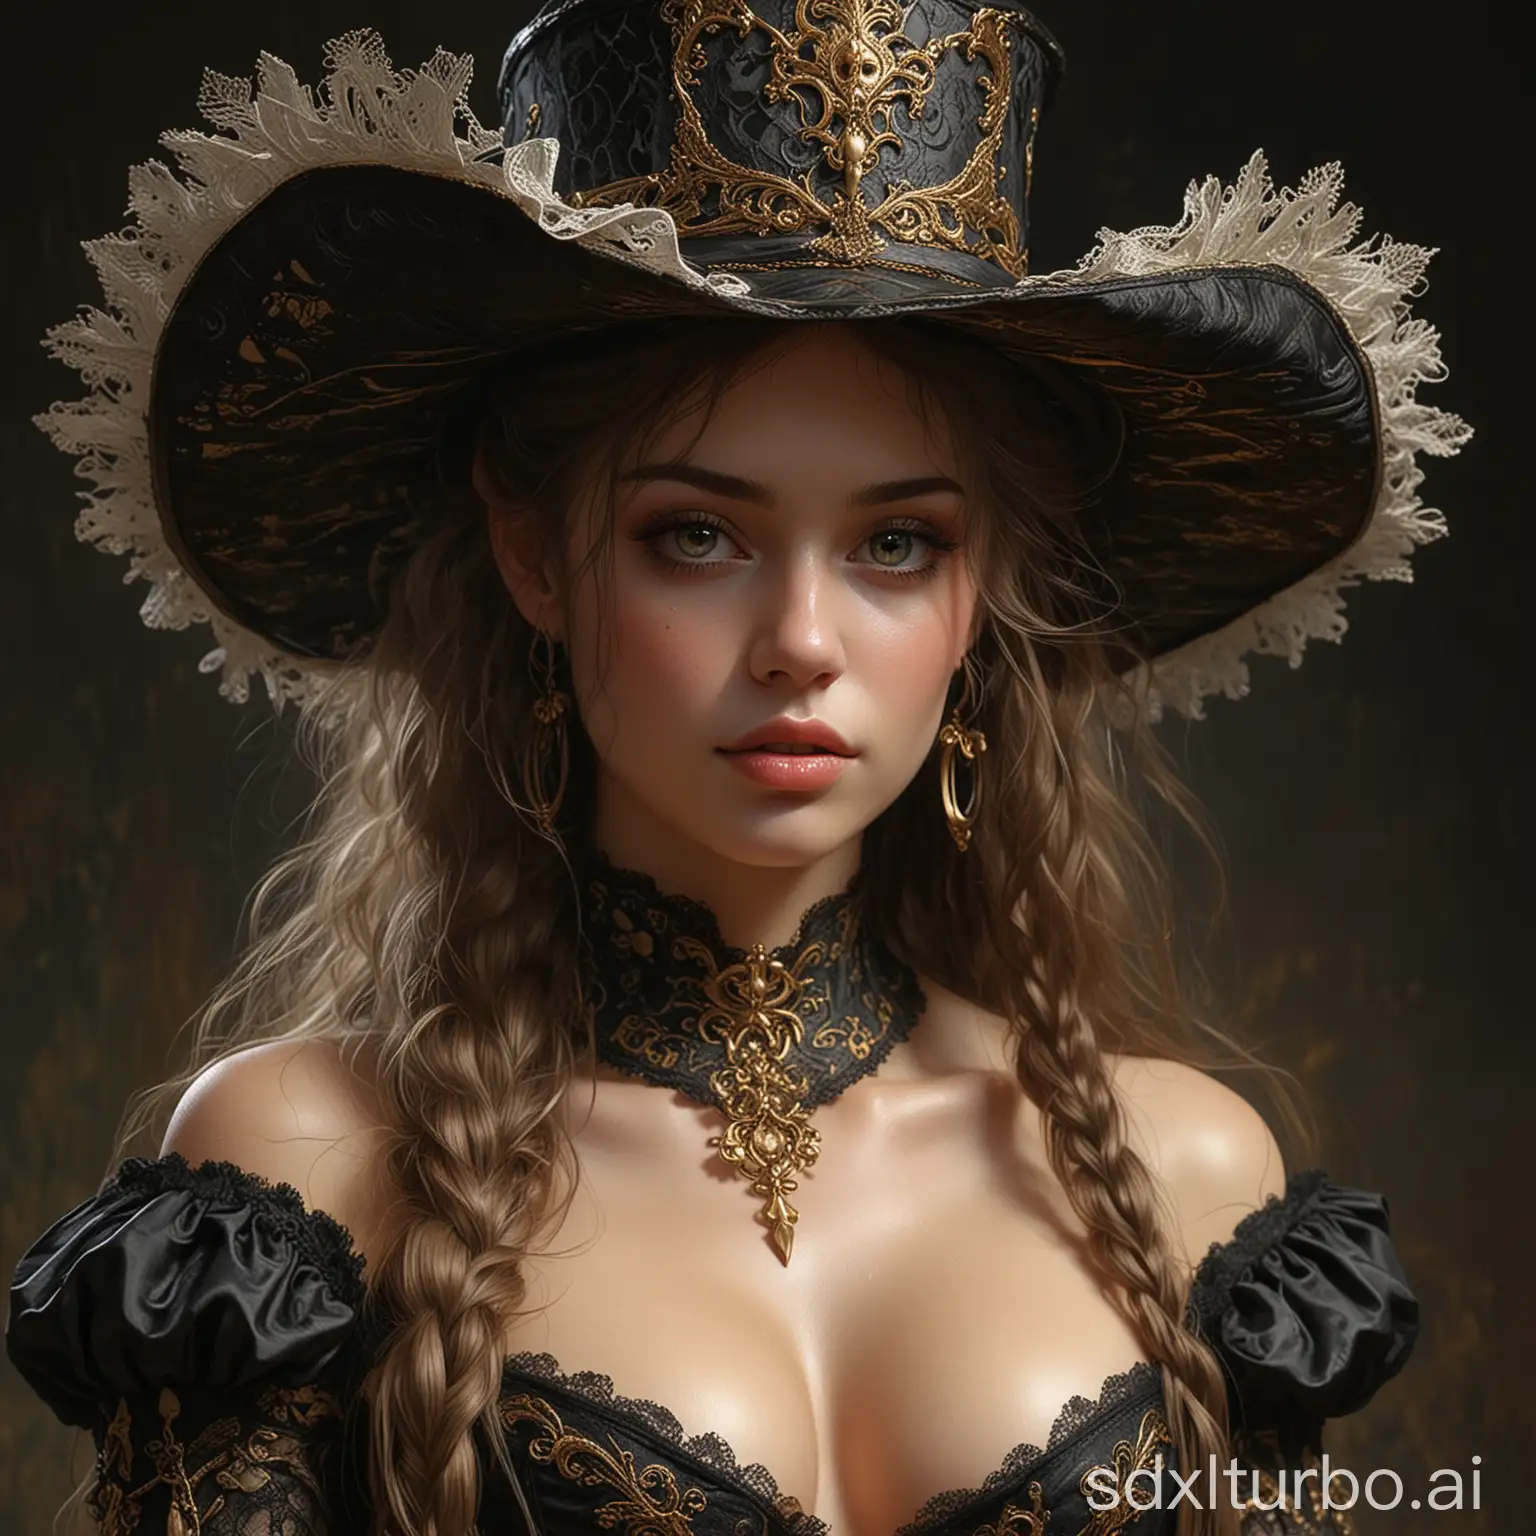 Hyperrealistic digital painting of a beautiful girl, reflections in very detailed eyes, looking at the viewer, long hair, large braid on the shoulder, hat, black and gold lace corset in a surreal and fantasy setting, combining the artistic styles of Jose Royo, Boris Vallejo, Julie Bell, Carne Griffiths and Brian Froud, accurate anatomy, with symmetrical centered composition, volumetric lighting, rays, bright color highlights, high contrast